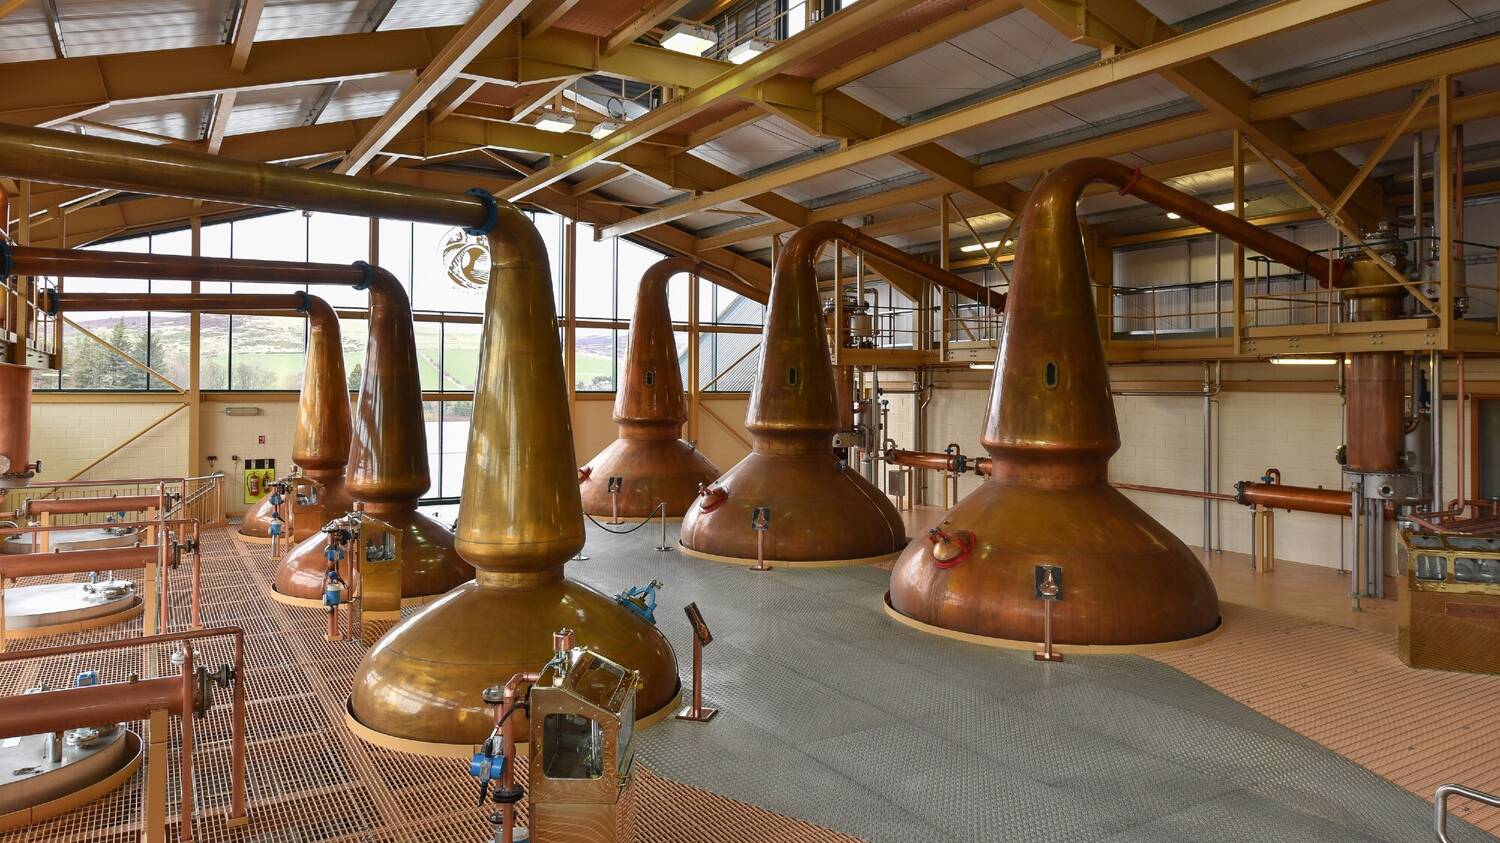 A room in a whisky distillery showing 6 large copper stills.